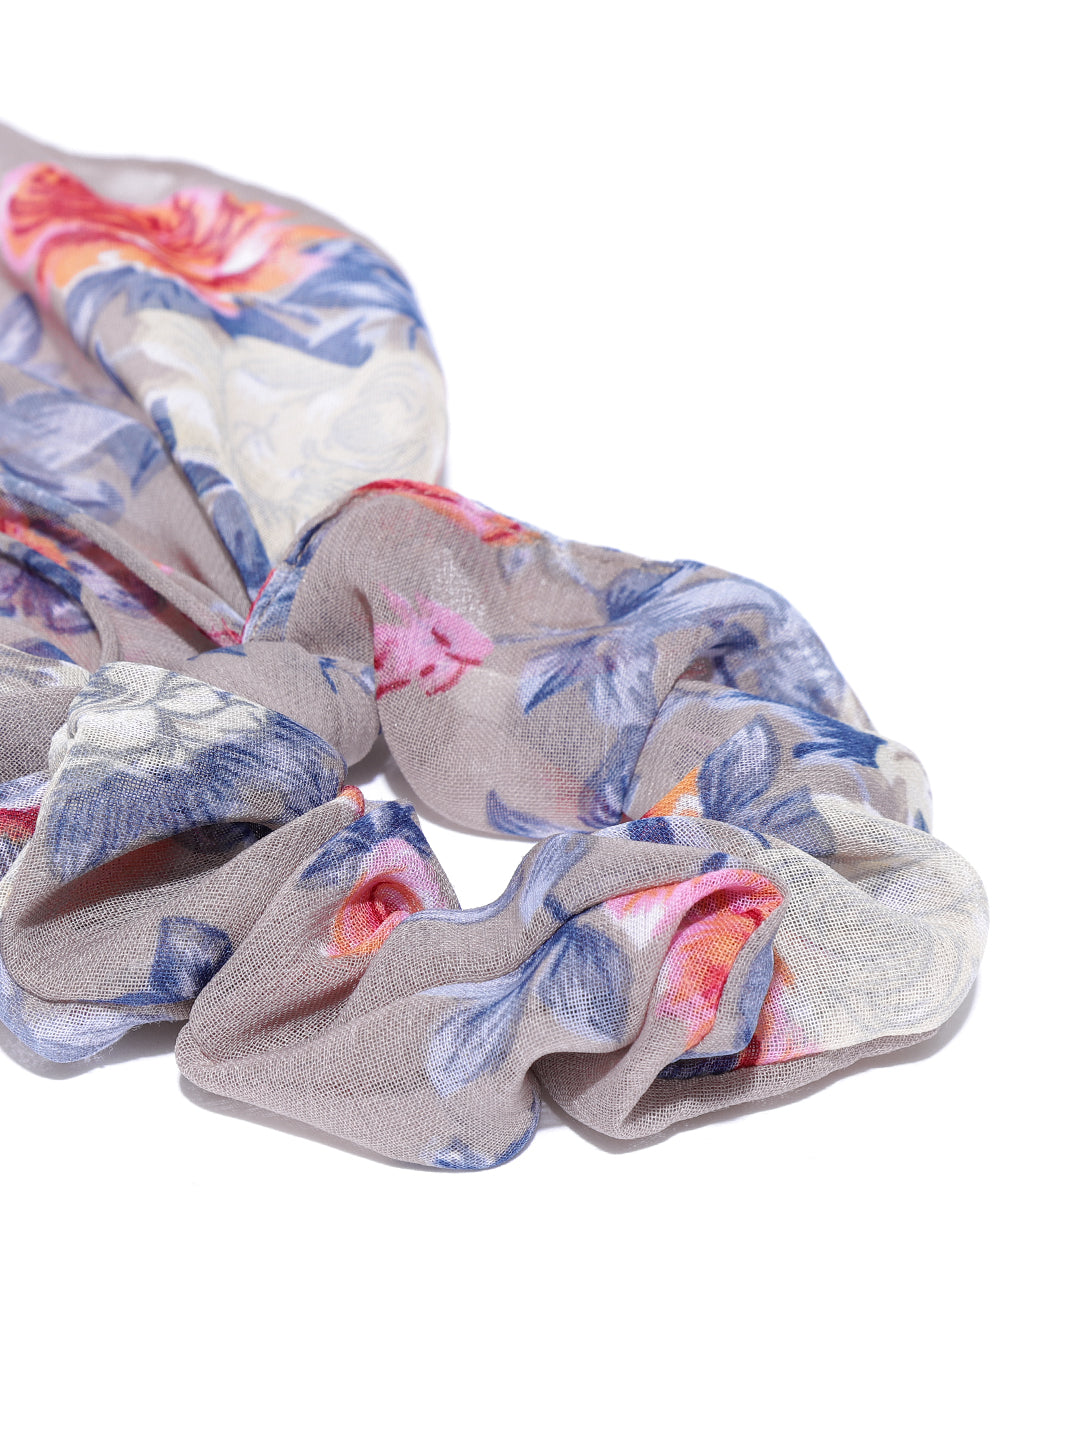 Blueberry multi floral printed ruffle scrunchie